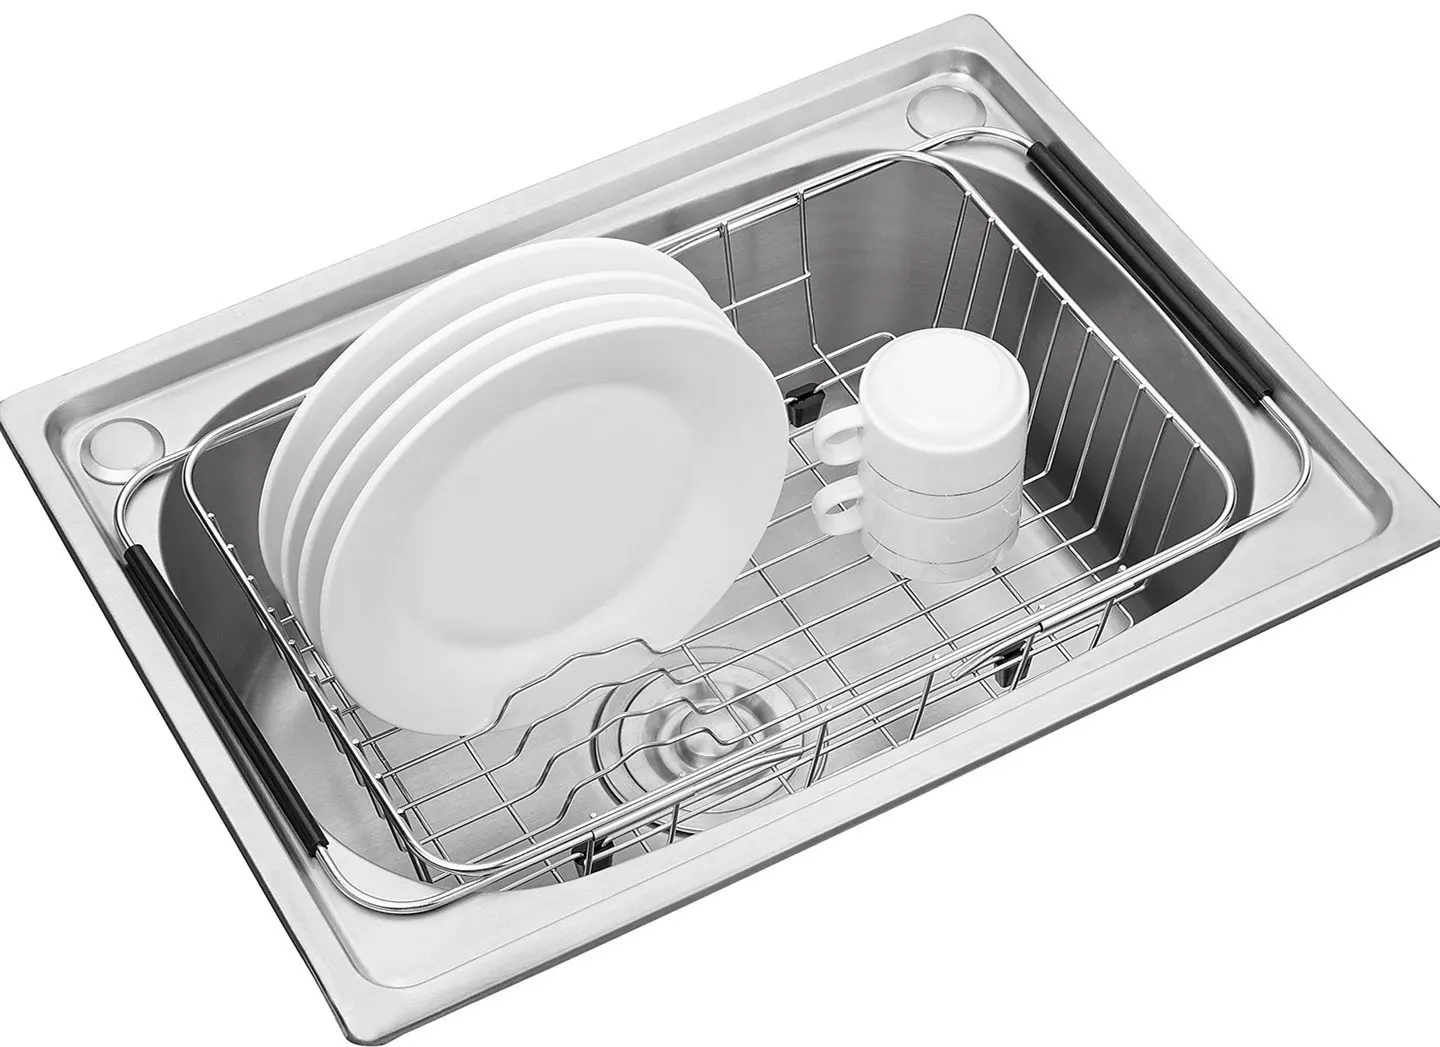 Cheap In Sink Dish Rack Stainless Steel Find In Sink Dish